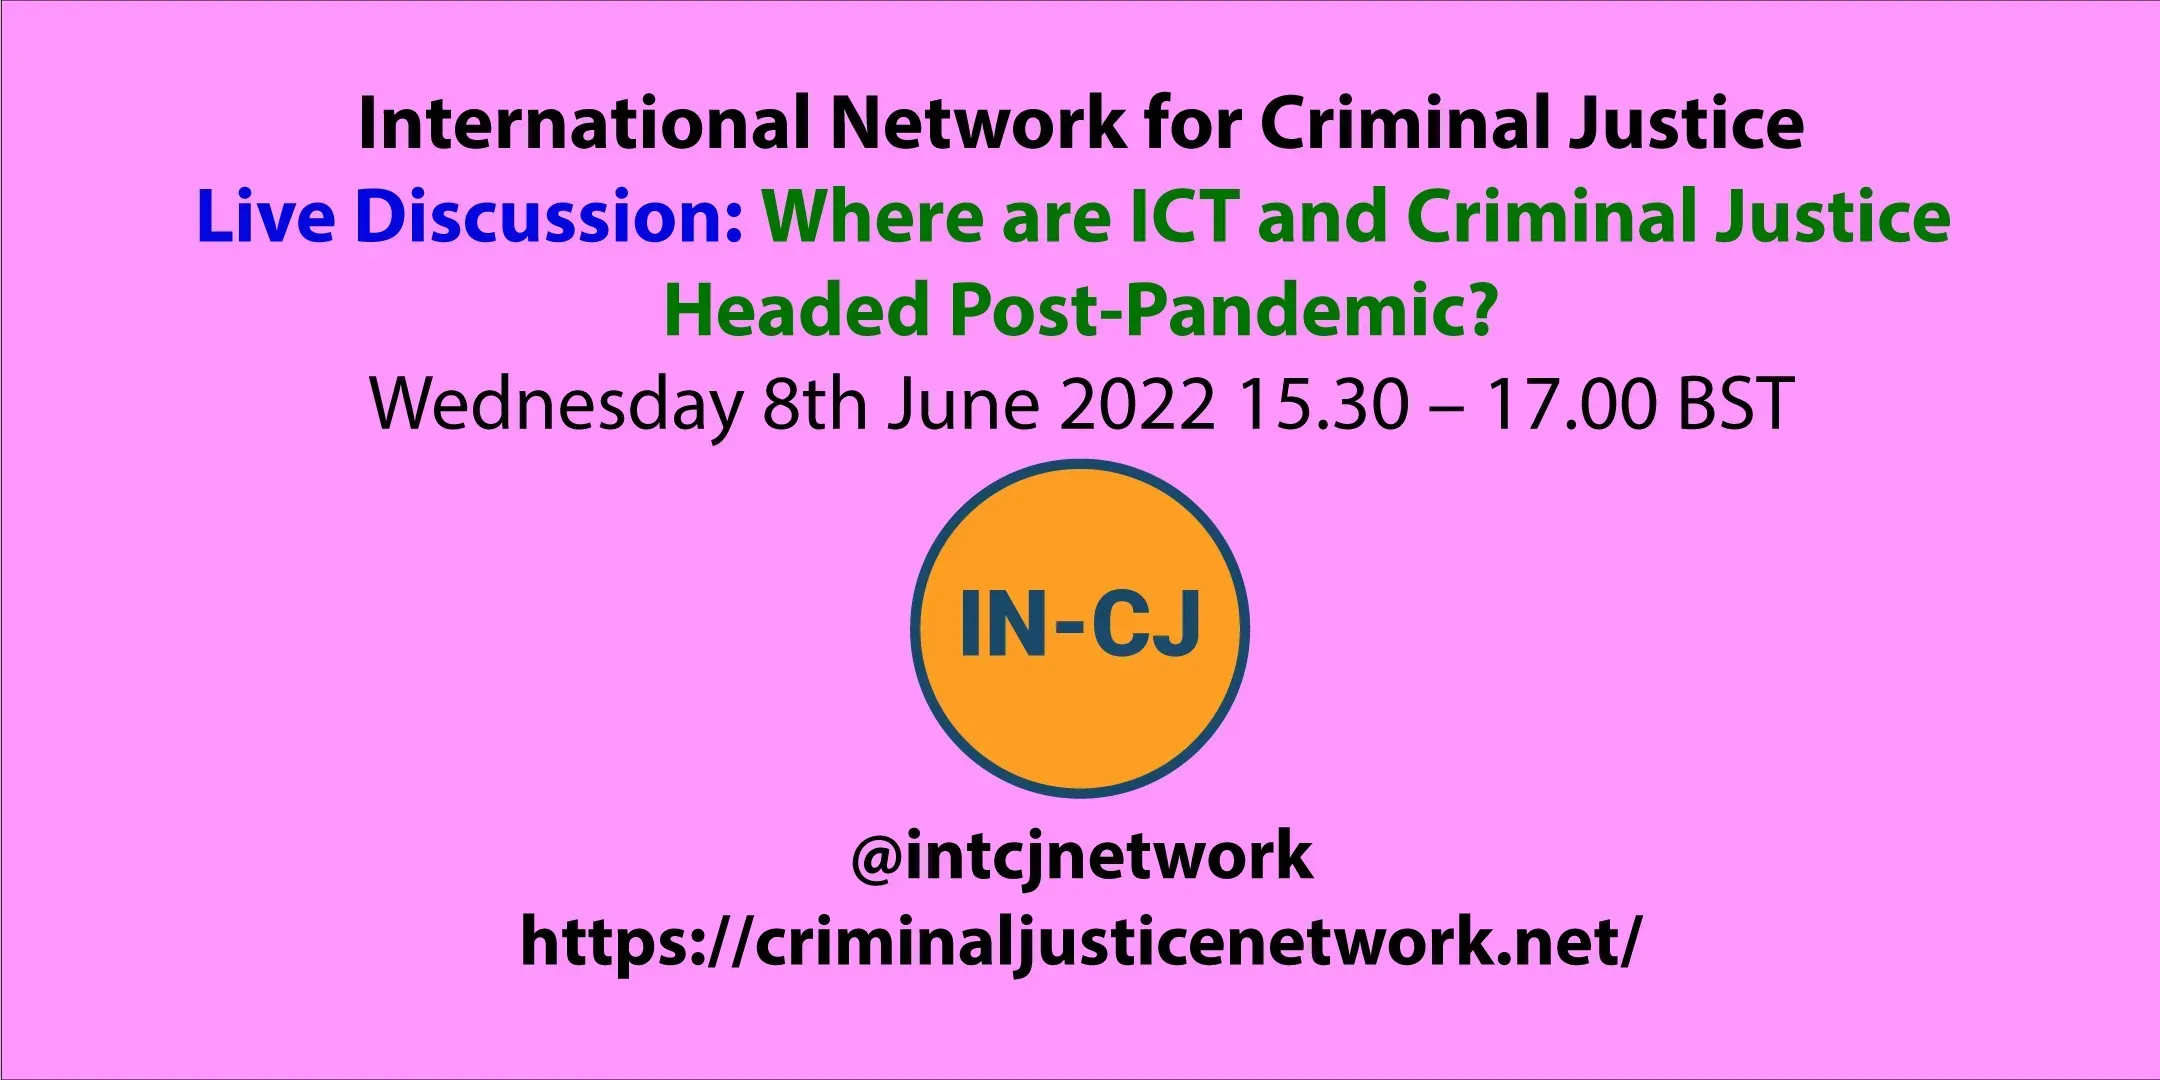 IN-CJ Live Discussion – Where are ICT and Criminal Justice Headed Post-Pandemic?